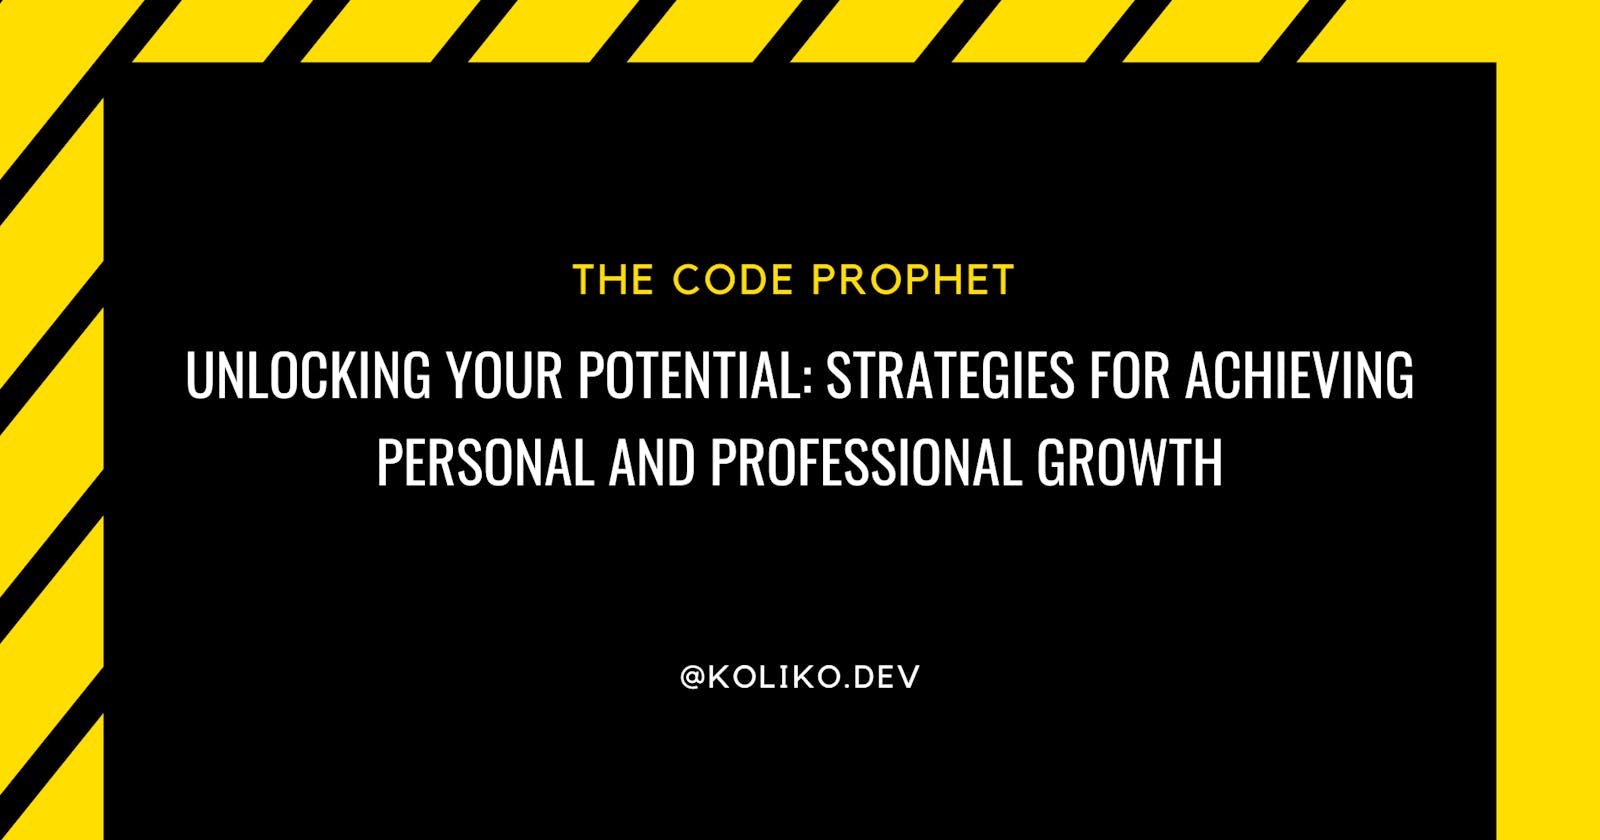 Unlocking Your Potential: Strategies for Achieving Personal and Professional Growth